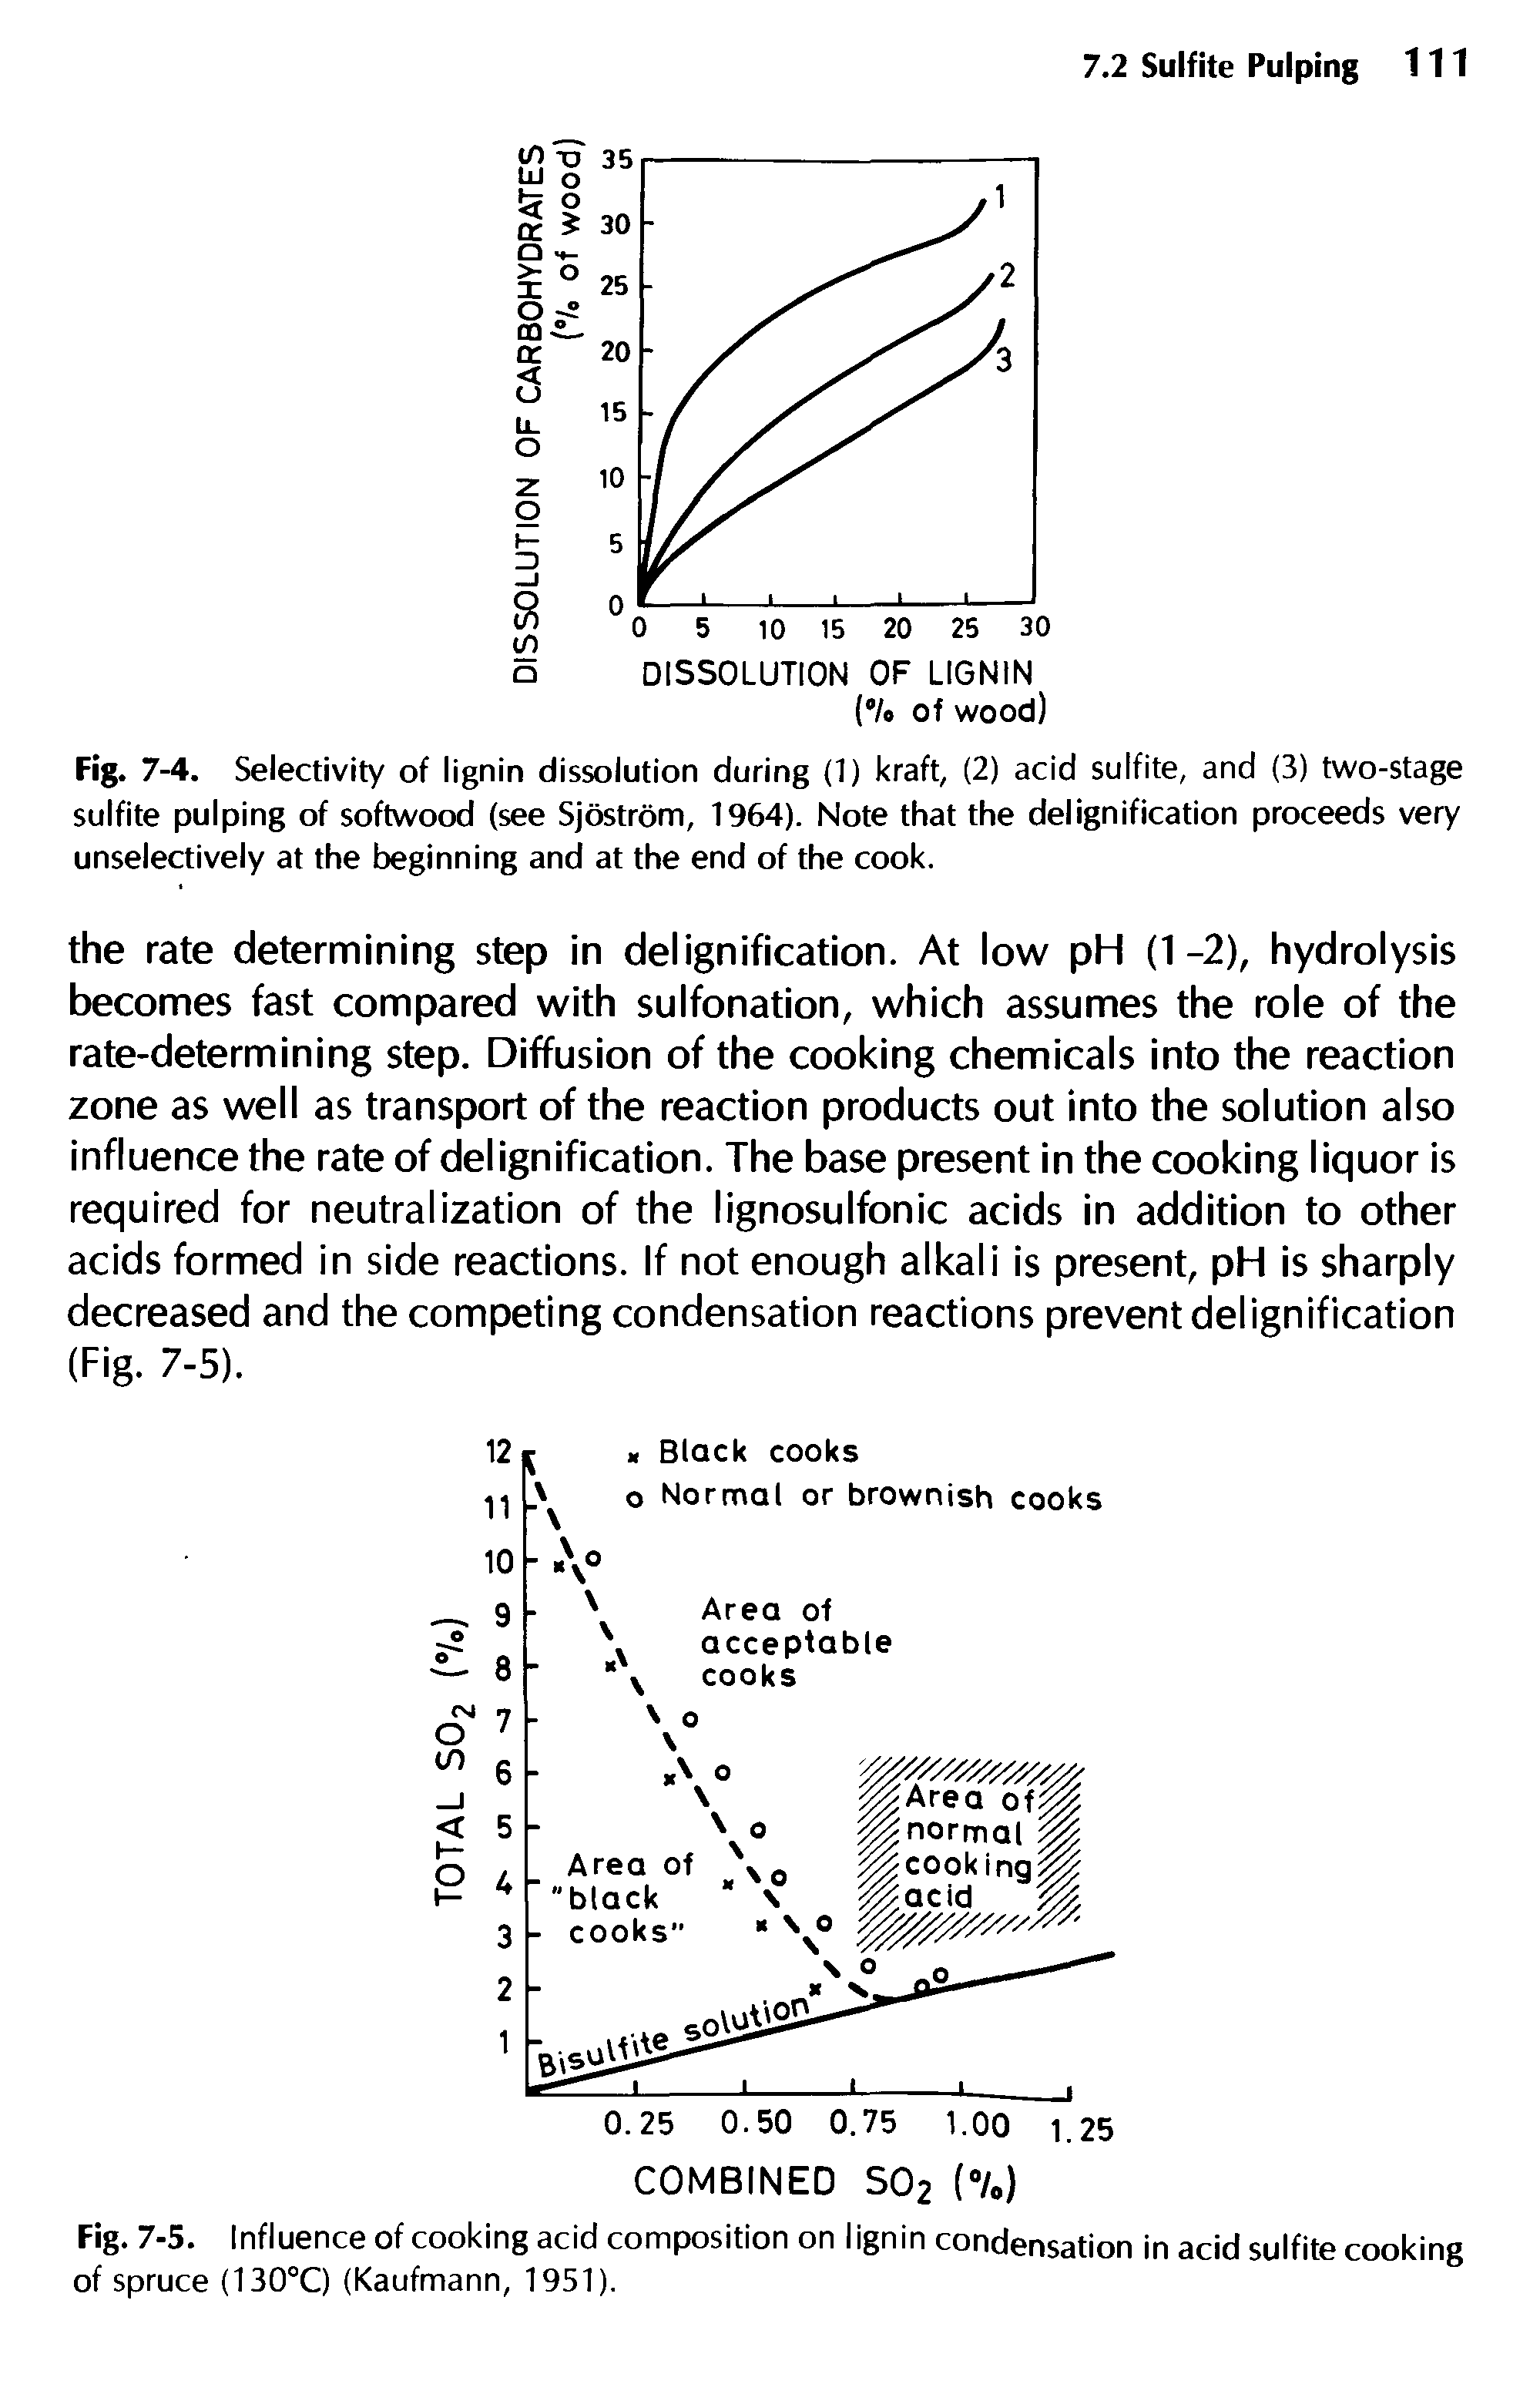 Fig. 7-4. Selectivity of lignin dissolution during (1) kraft, (2) acid sulfite, and (3) two-stage sulfite pulping of softwood (see Sjostrom, 1964). Note that the delignification proceeds very unselectively at the beginning and at the end of the cook.